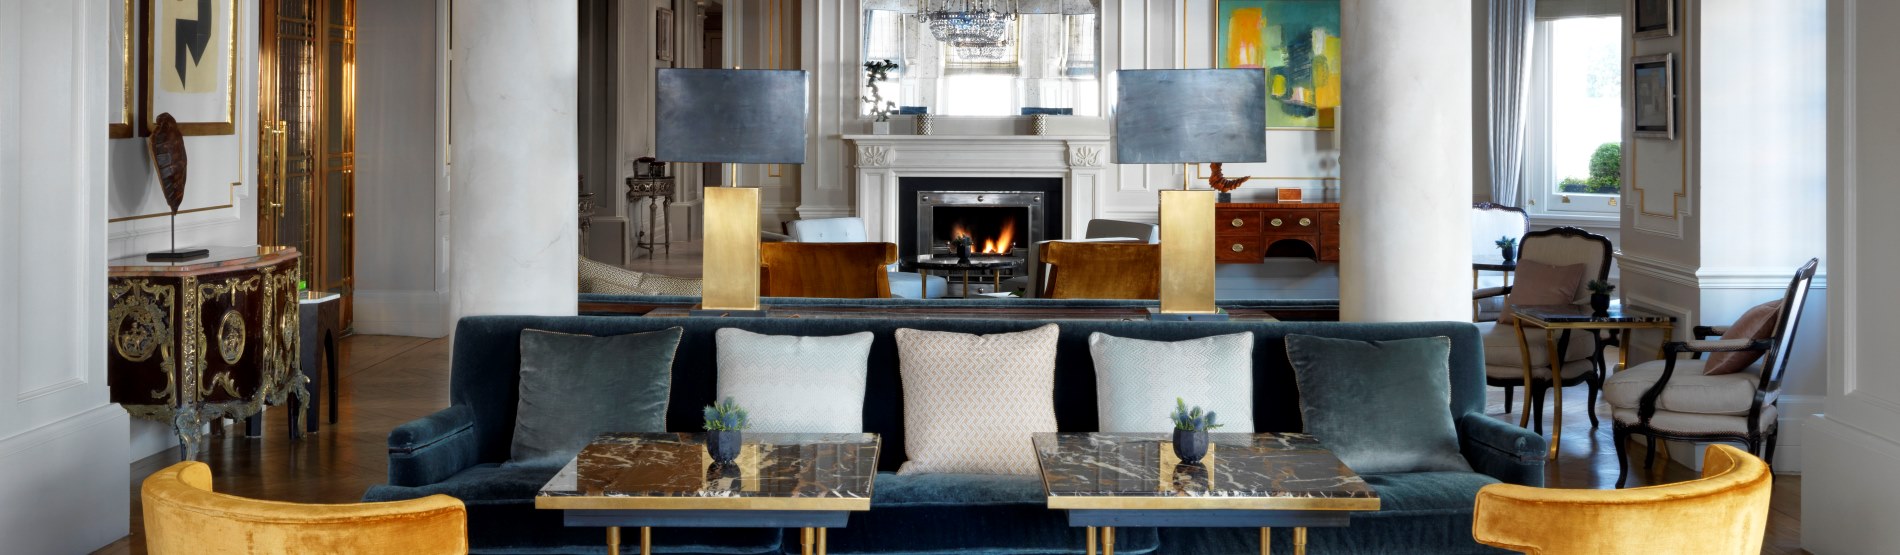 Lobby seating at The Kensington hotel in London